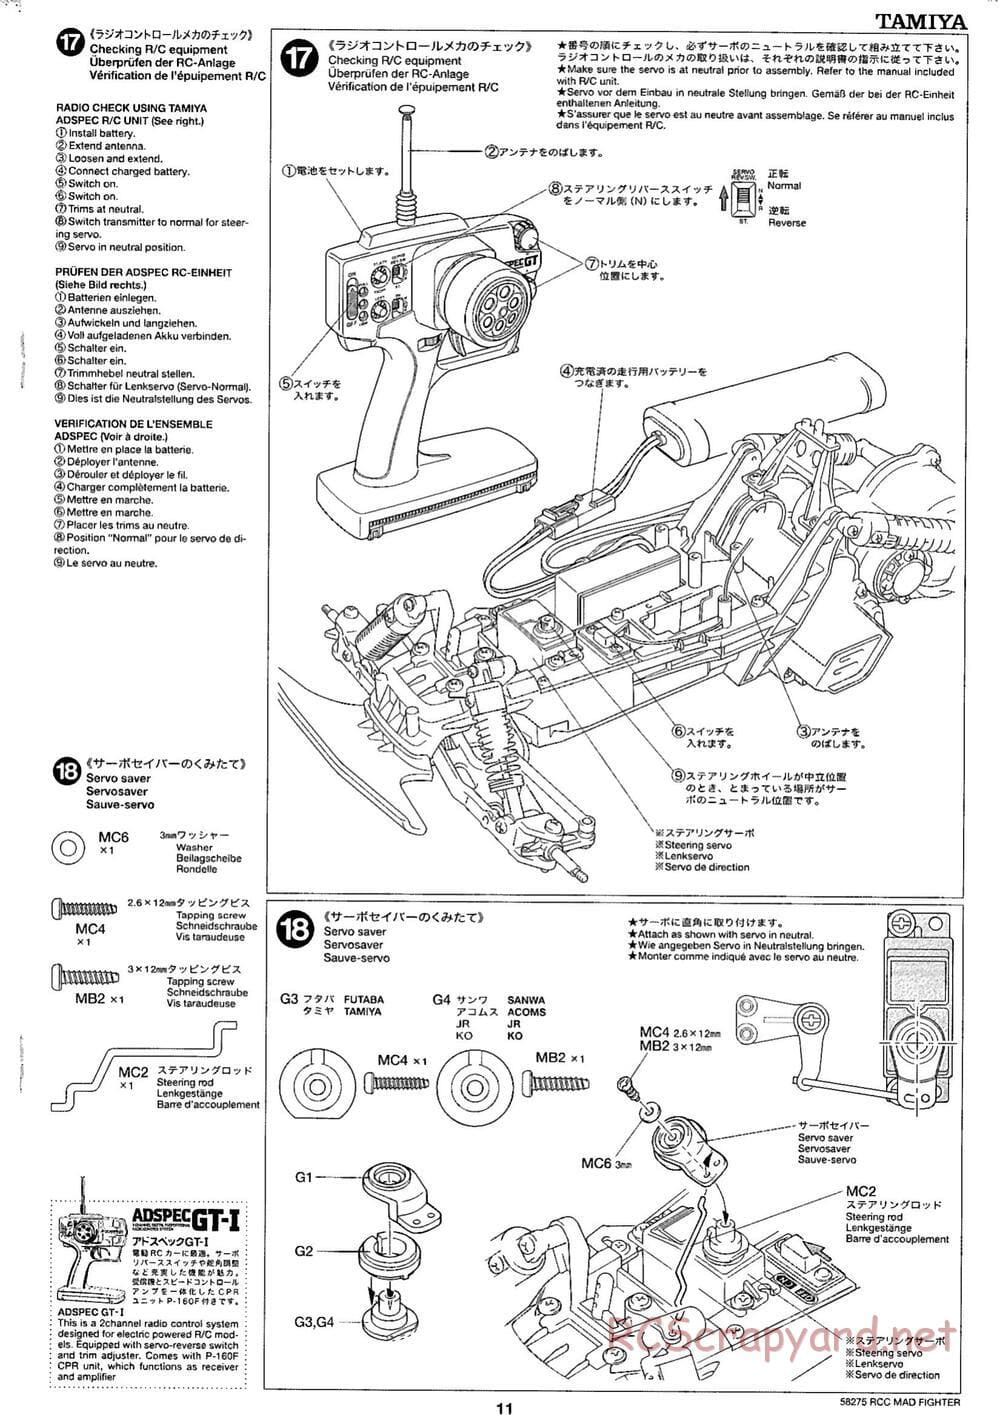 Tamiya - Mad Fighter Chassis - Manual - Page 11